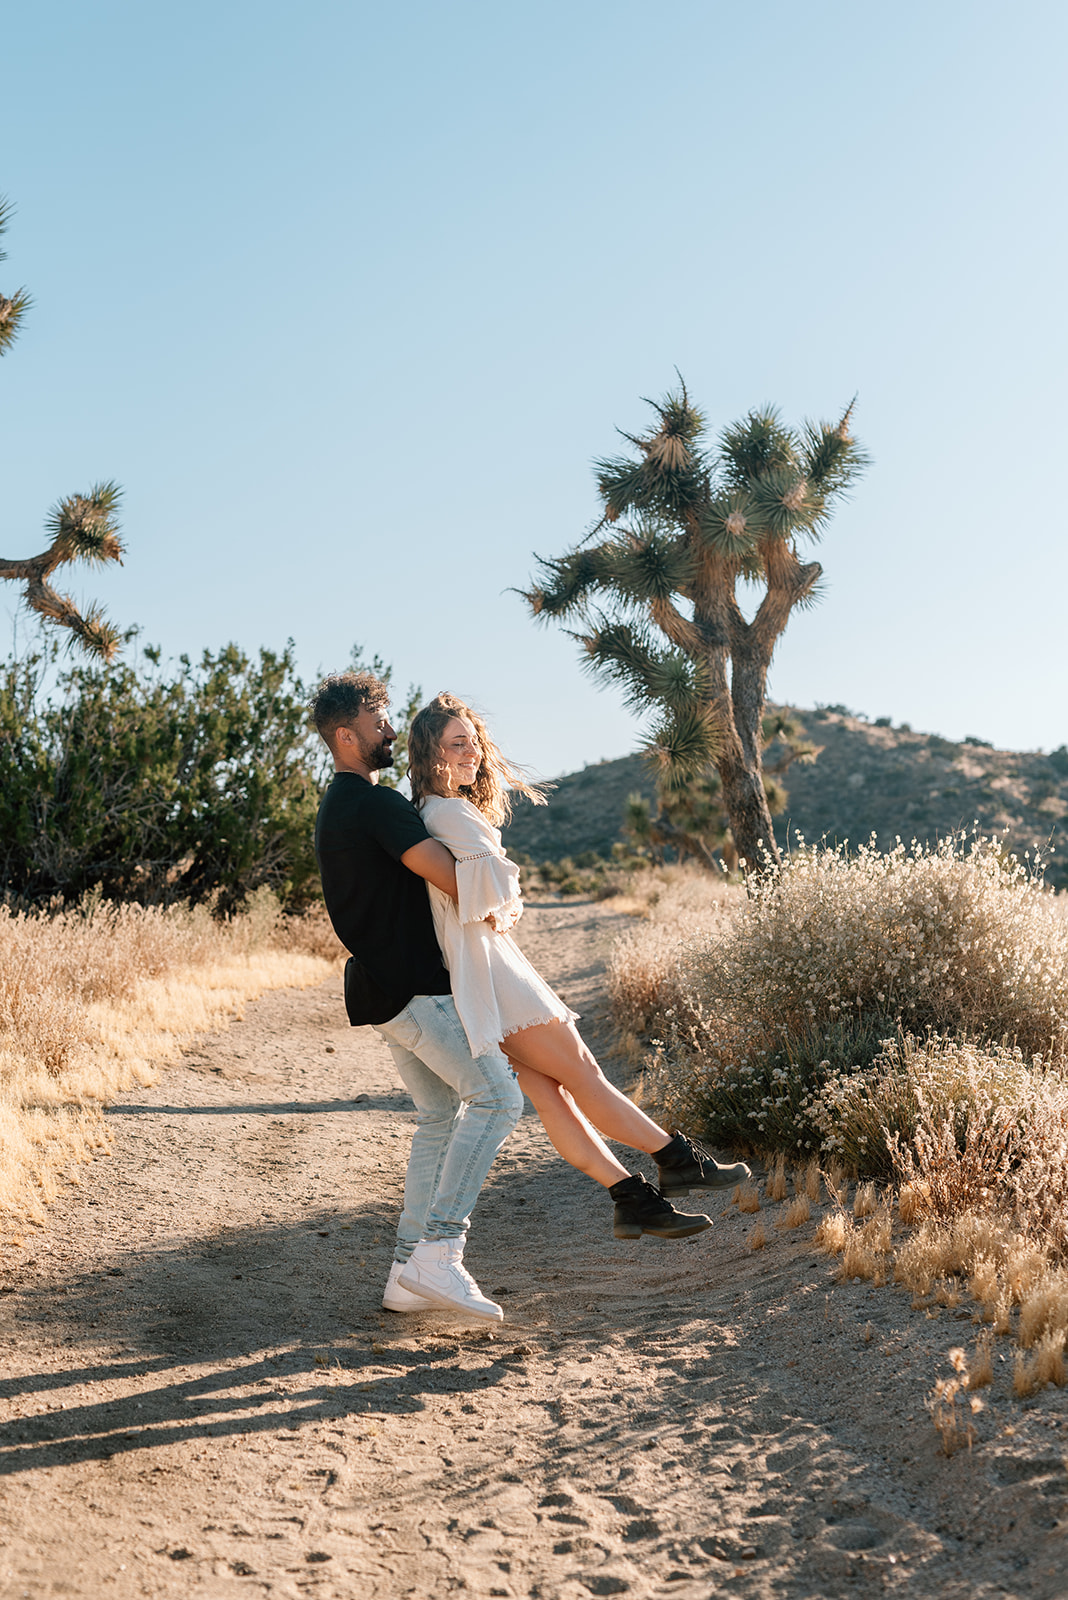 Engaged man picks up his fiance and spins her in the desert with mountains and cacti in the background